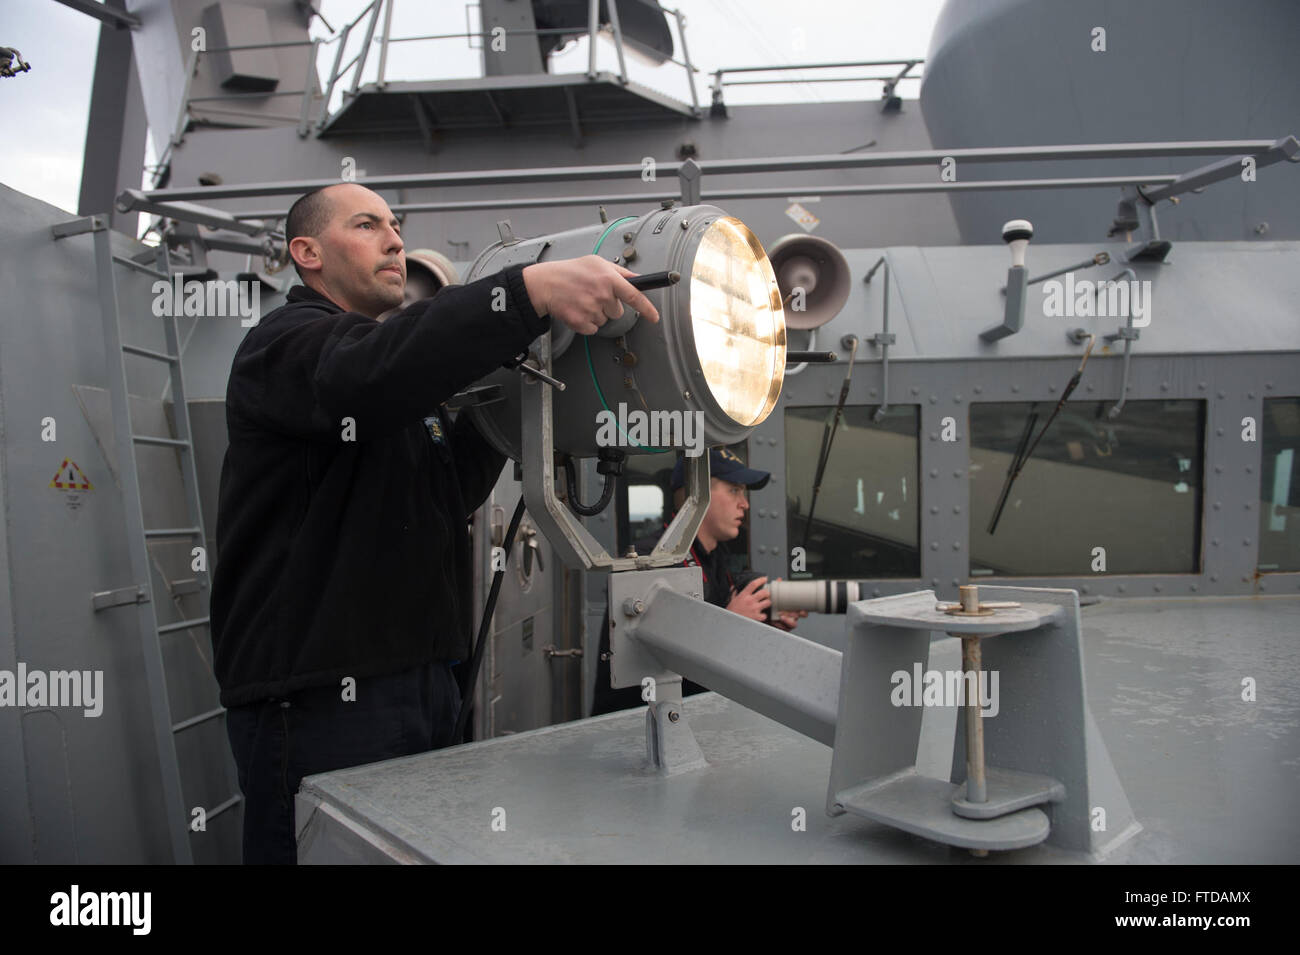 150326-N-ZE250-040 MEDITERRANEAN SEA (March 26, 2015) Chief Quartermaster Kevin Ortega, from Astoria, Oregon, uses a 12-inch searchlight to communicate in Morse Code with Hellenic Navy Ship HS Themistokles (F 465) during a passing exercise March 26, 2015. USS Jason Dunham (DDG 109) Jason Dunham, an Arleigh Burke-class guided-missile destroyer homeported in Norfolk, is conducting naval operations in the U.S. 6th Fleet area of operations in support of U.S. national security interests in Europe. (U.S. Navy photo by Mass Communication Specialist 3rd Class Weston Jones/Released) Stock Photo